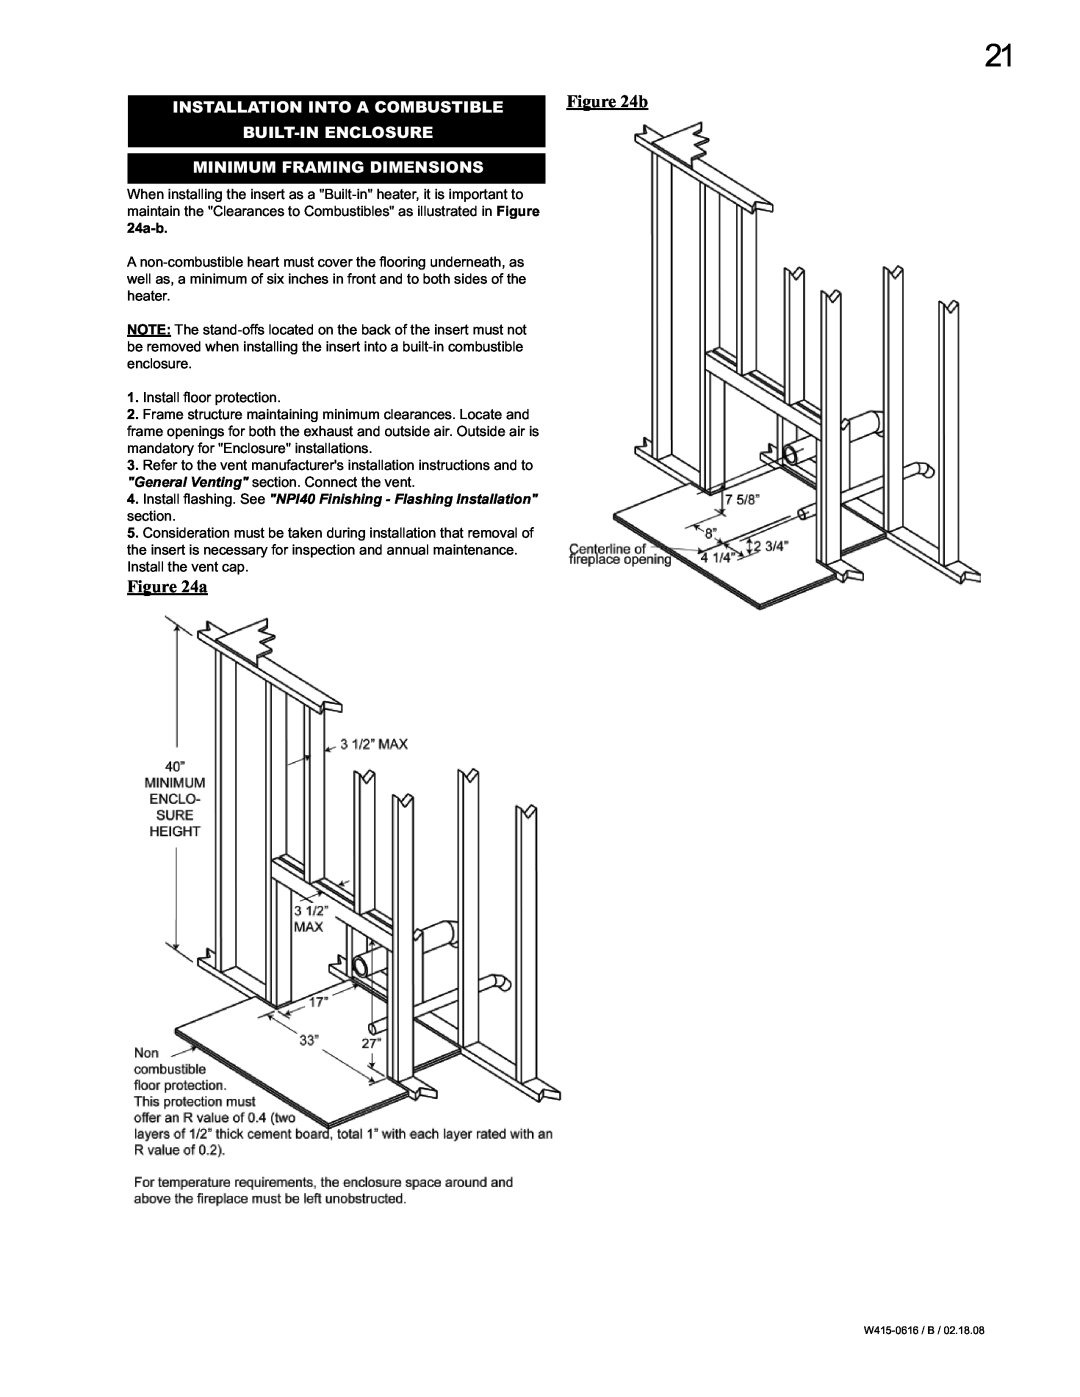 Napoleon Fireplaces NPS40, NPI40 Installation Into A Combustible Built-Inenclosure, Minimum Framing Dimensions 